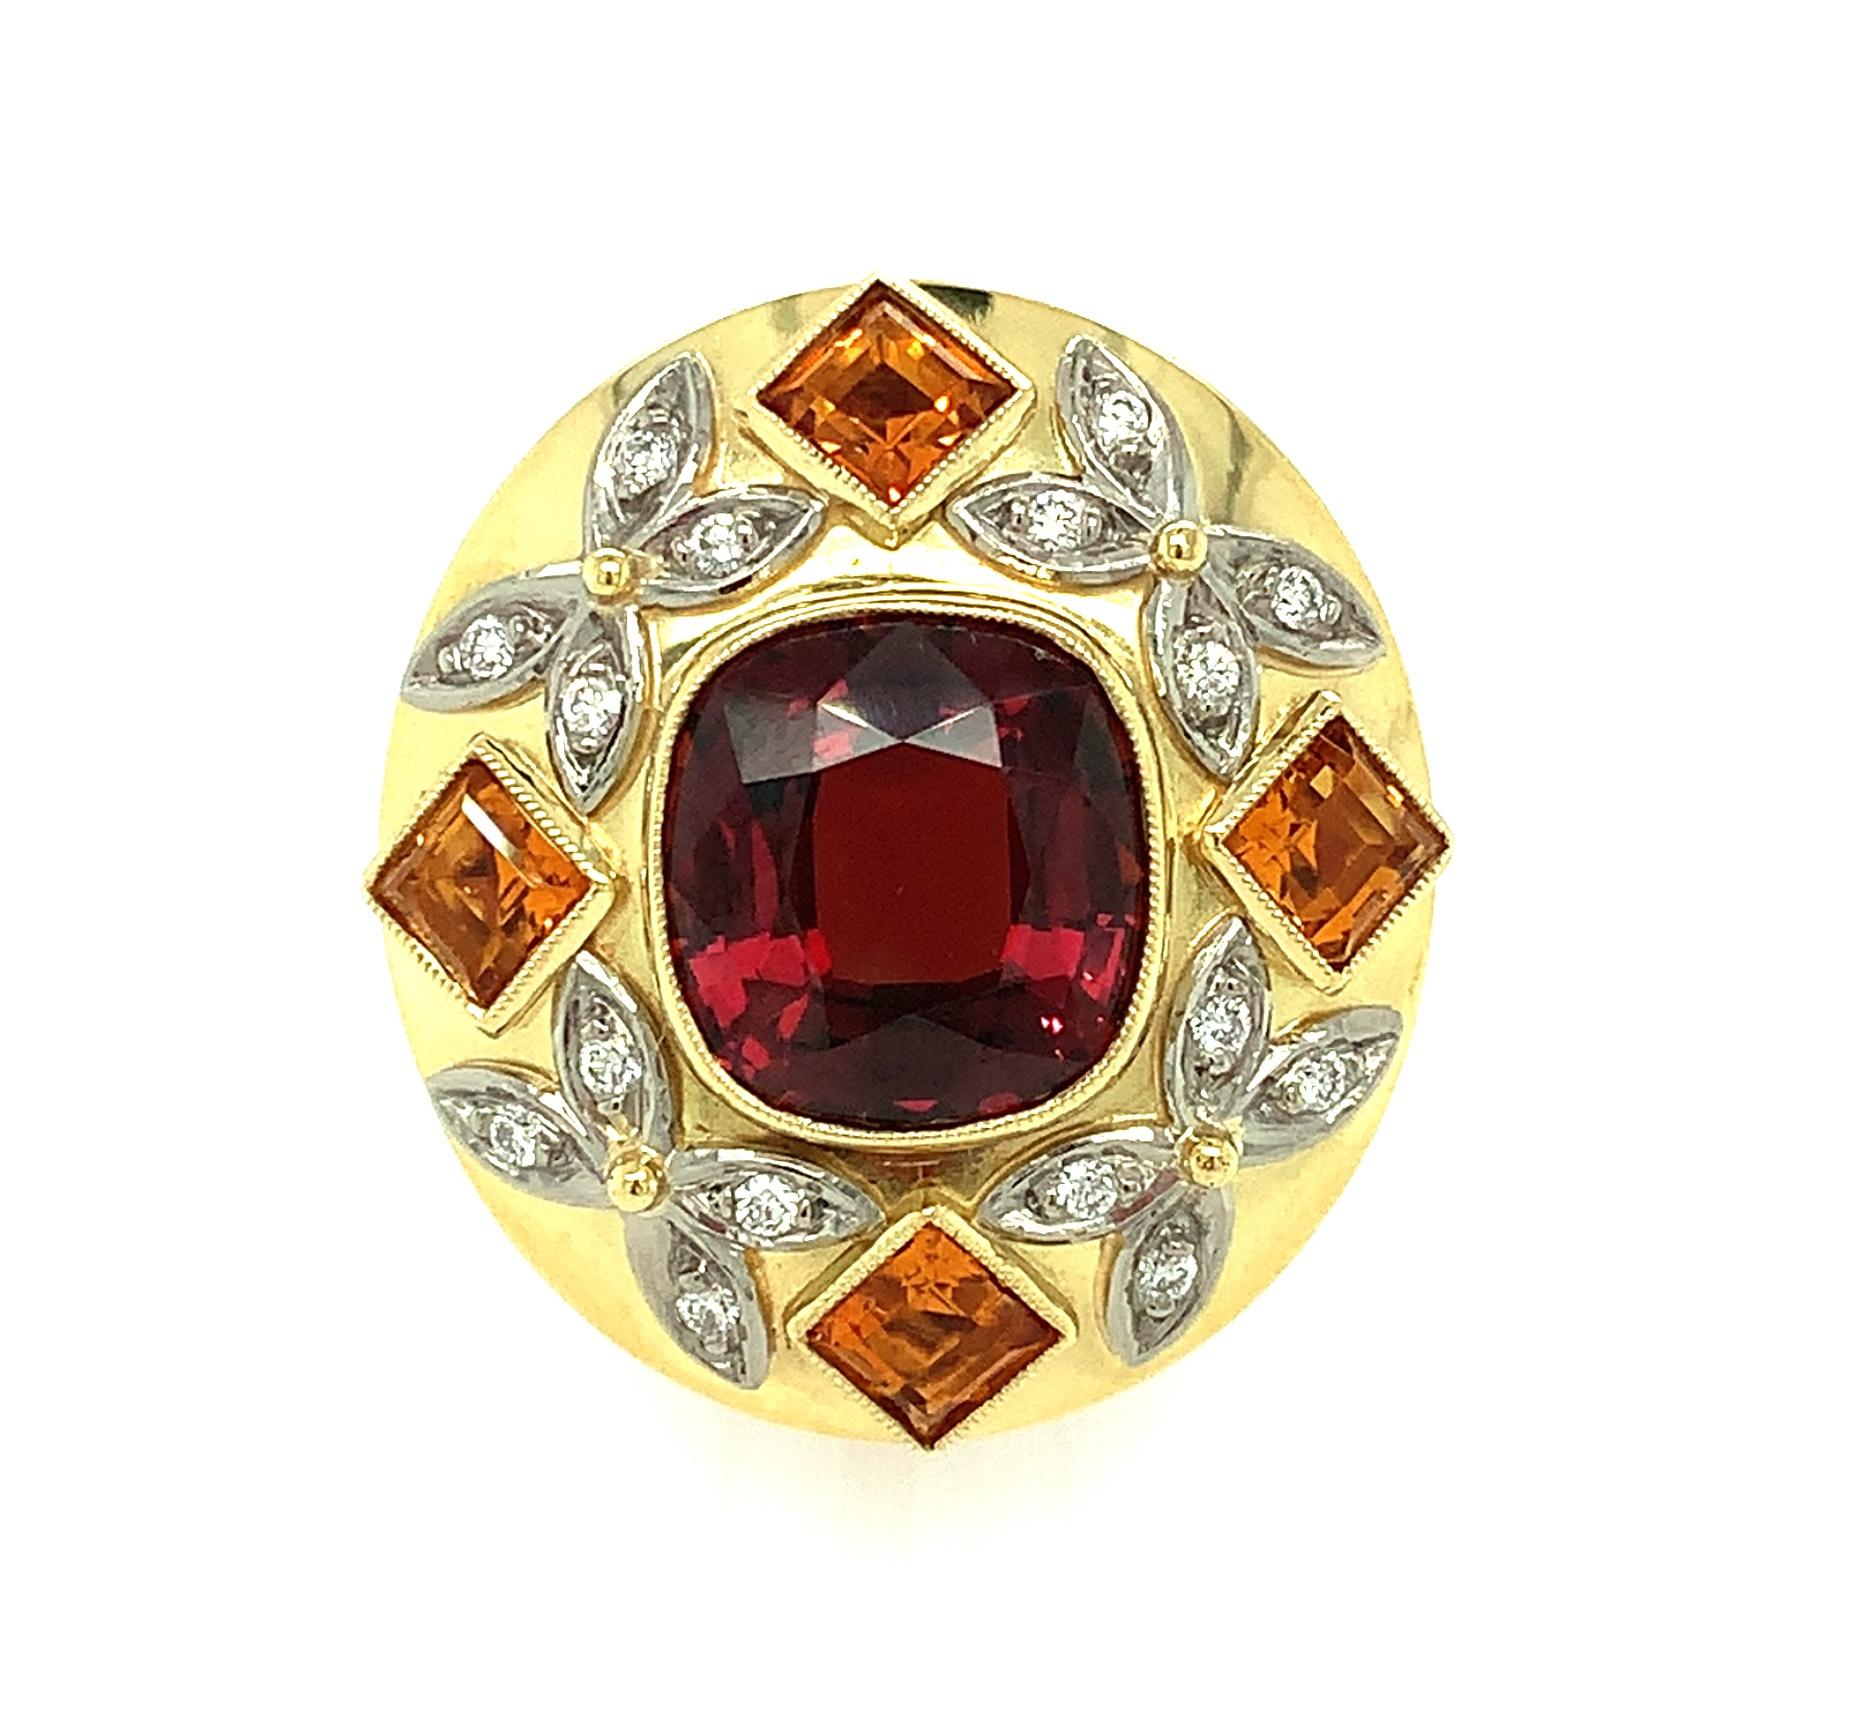 A fiery, orange-red spinel is set in this beautiful 18k yellow, rose and white gold handmade ring. The design is inspired by all things regal and is perfect for someone who is ready to make a statement! Square faceted citrines set in yellow gold